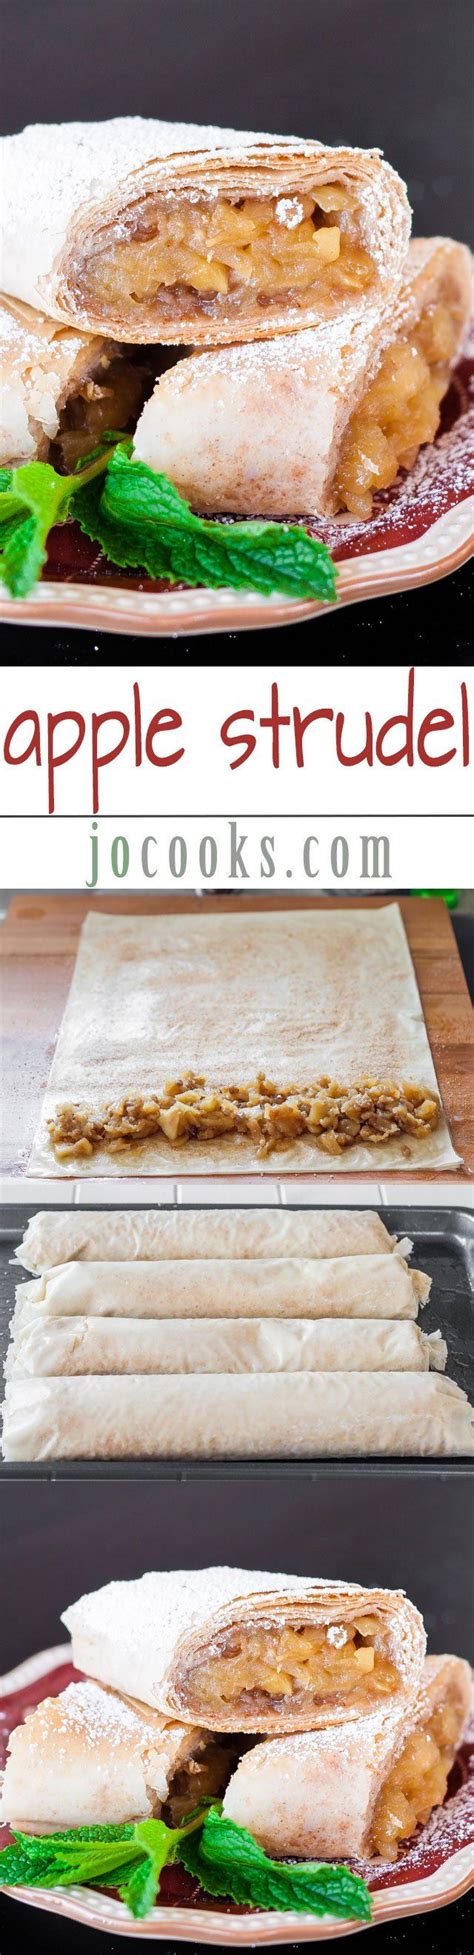 August 3rd with some juicy watermelon recipes! Apple Strudel - This amazing recipe will make you enjoy ...